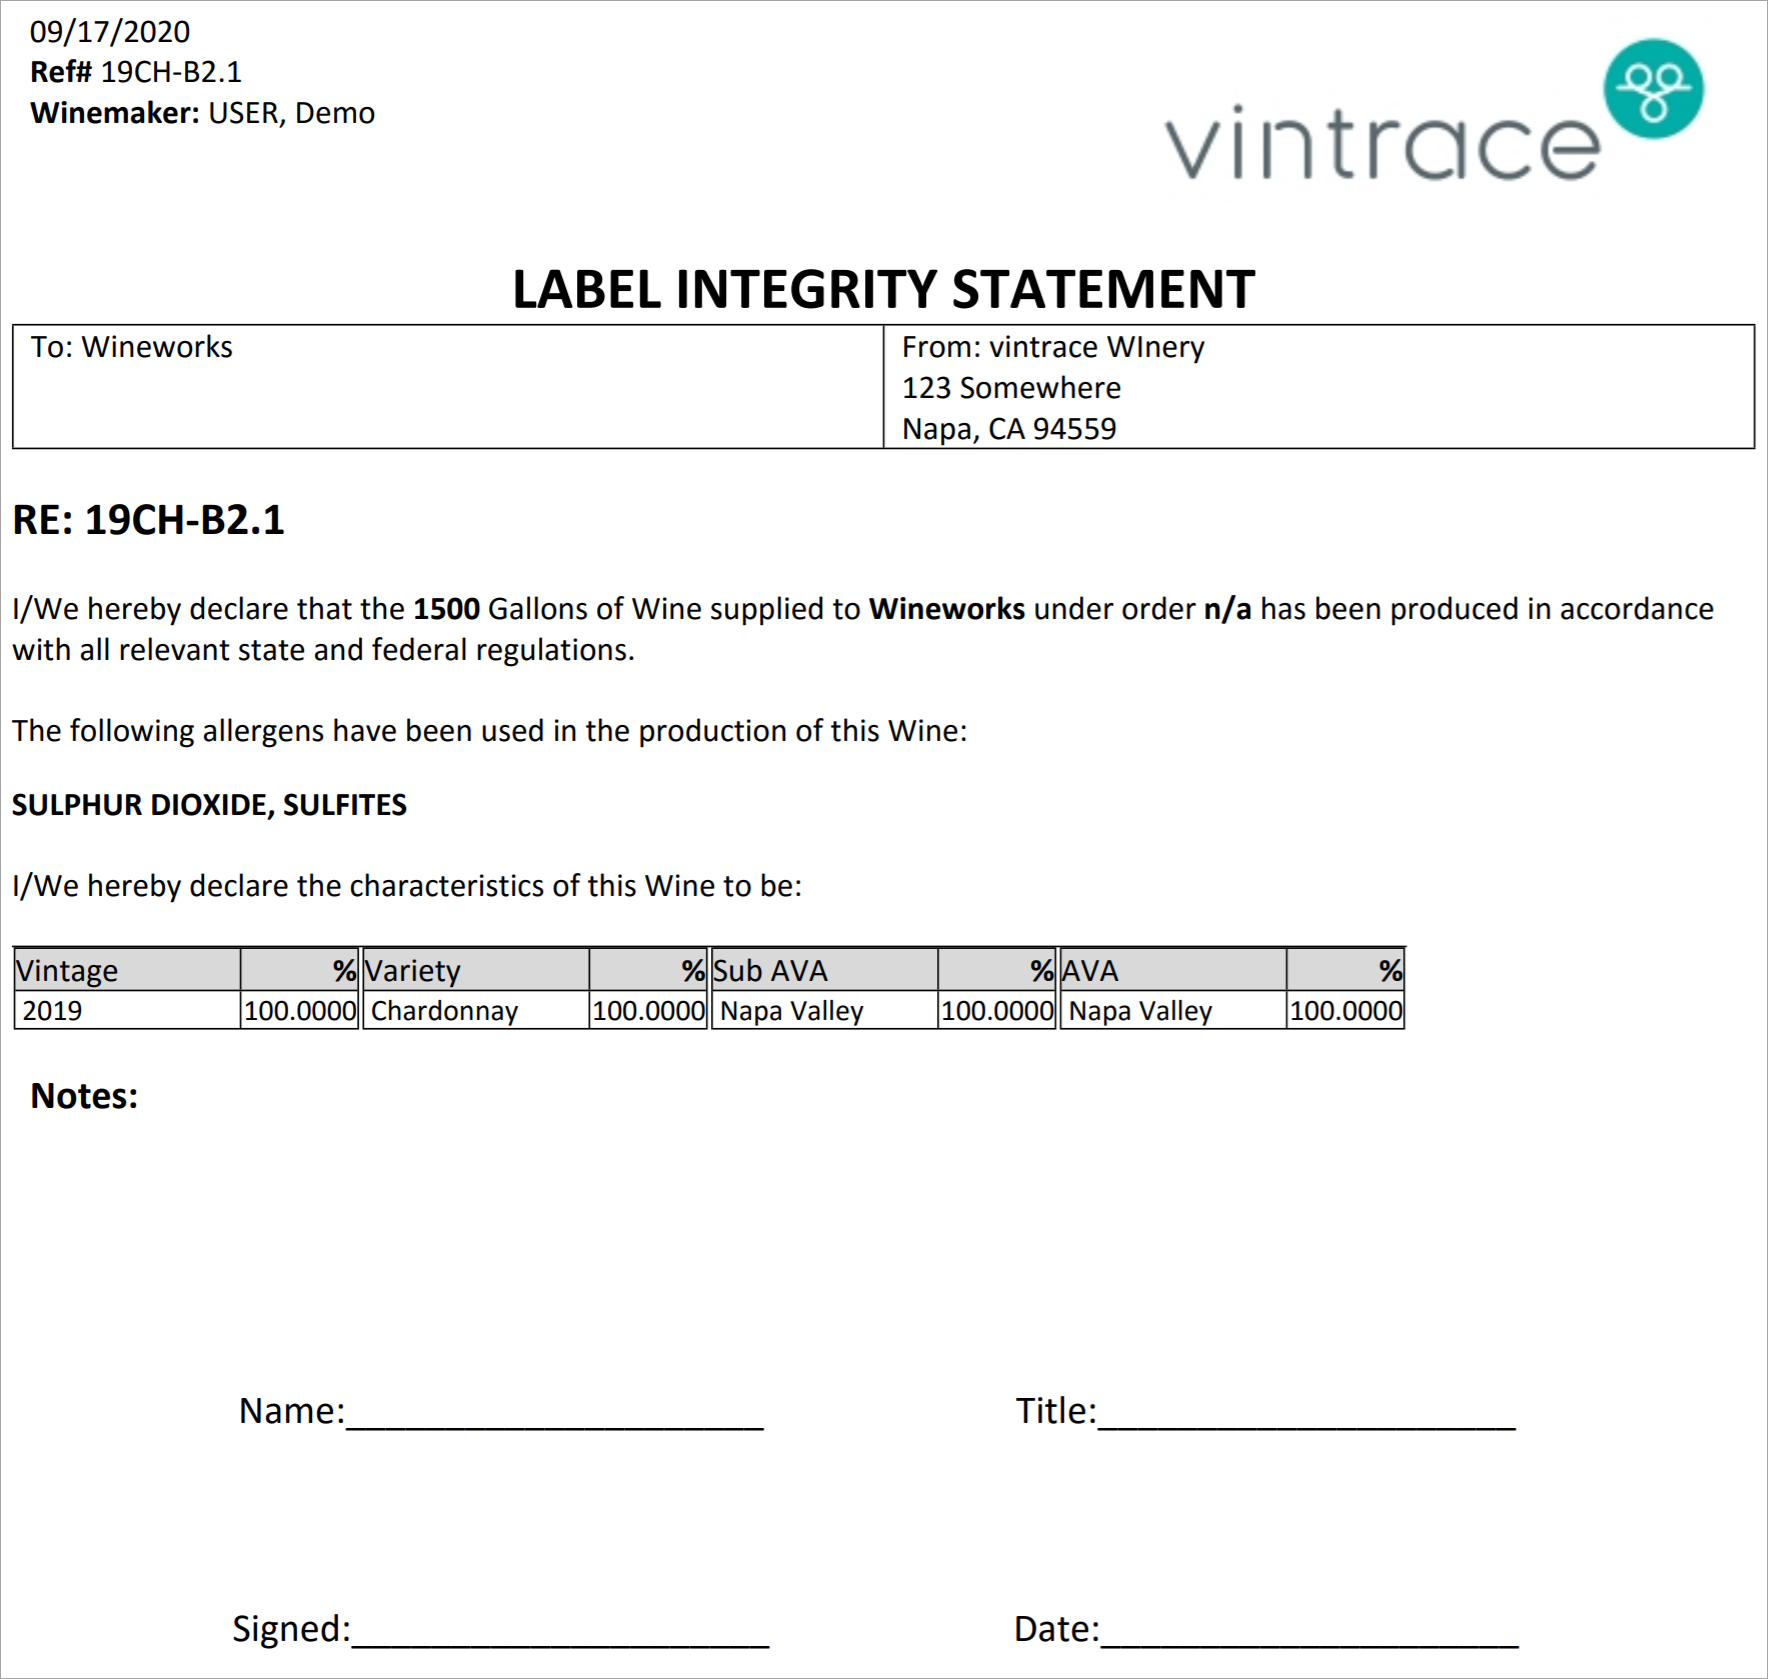 Label_Integrity_Statement_with_Allergen_19CH-B2.1_20200917.png